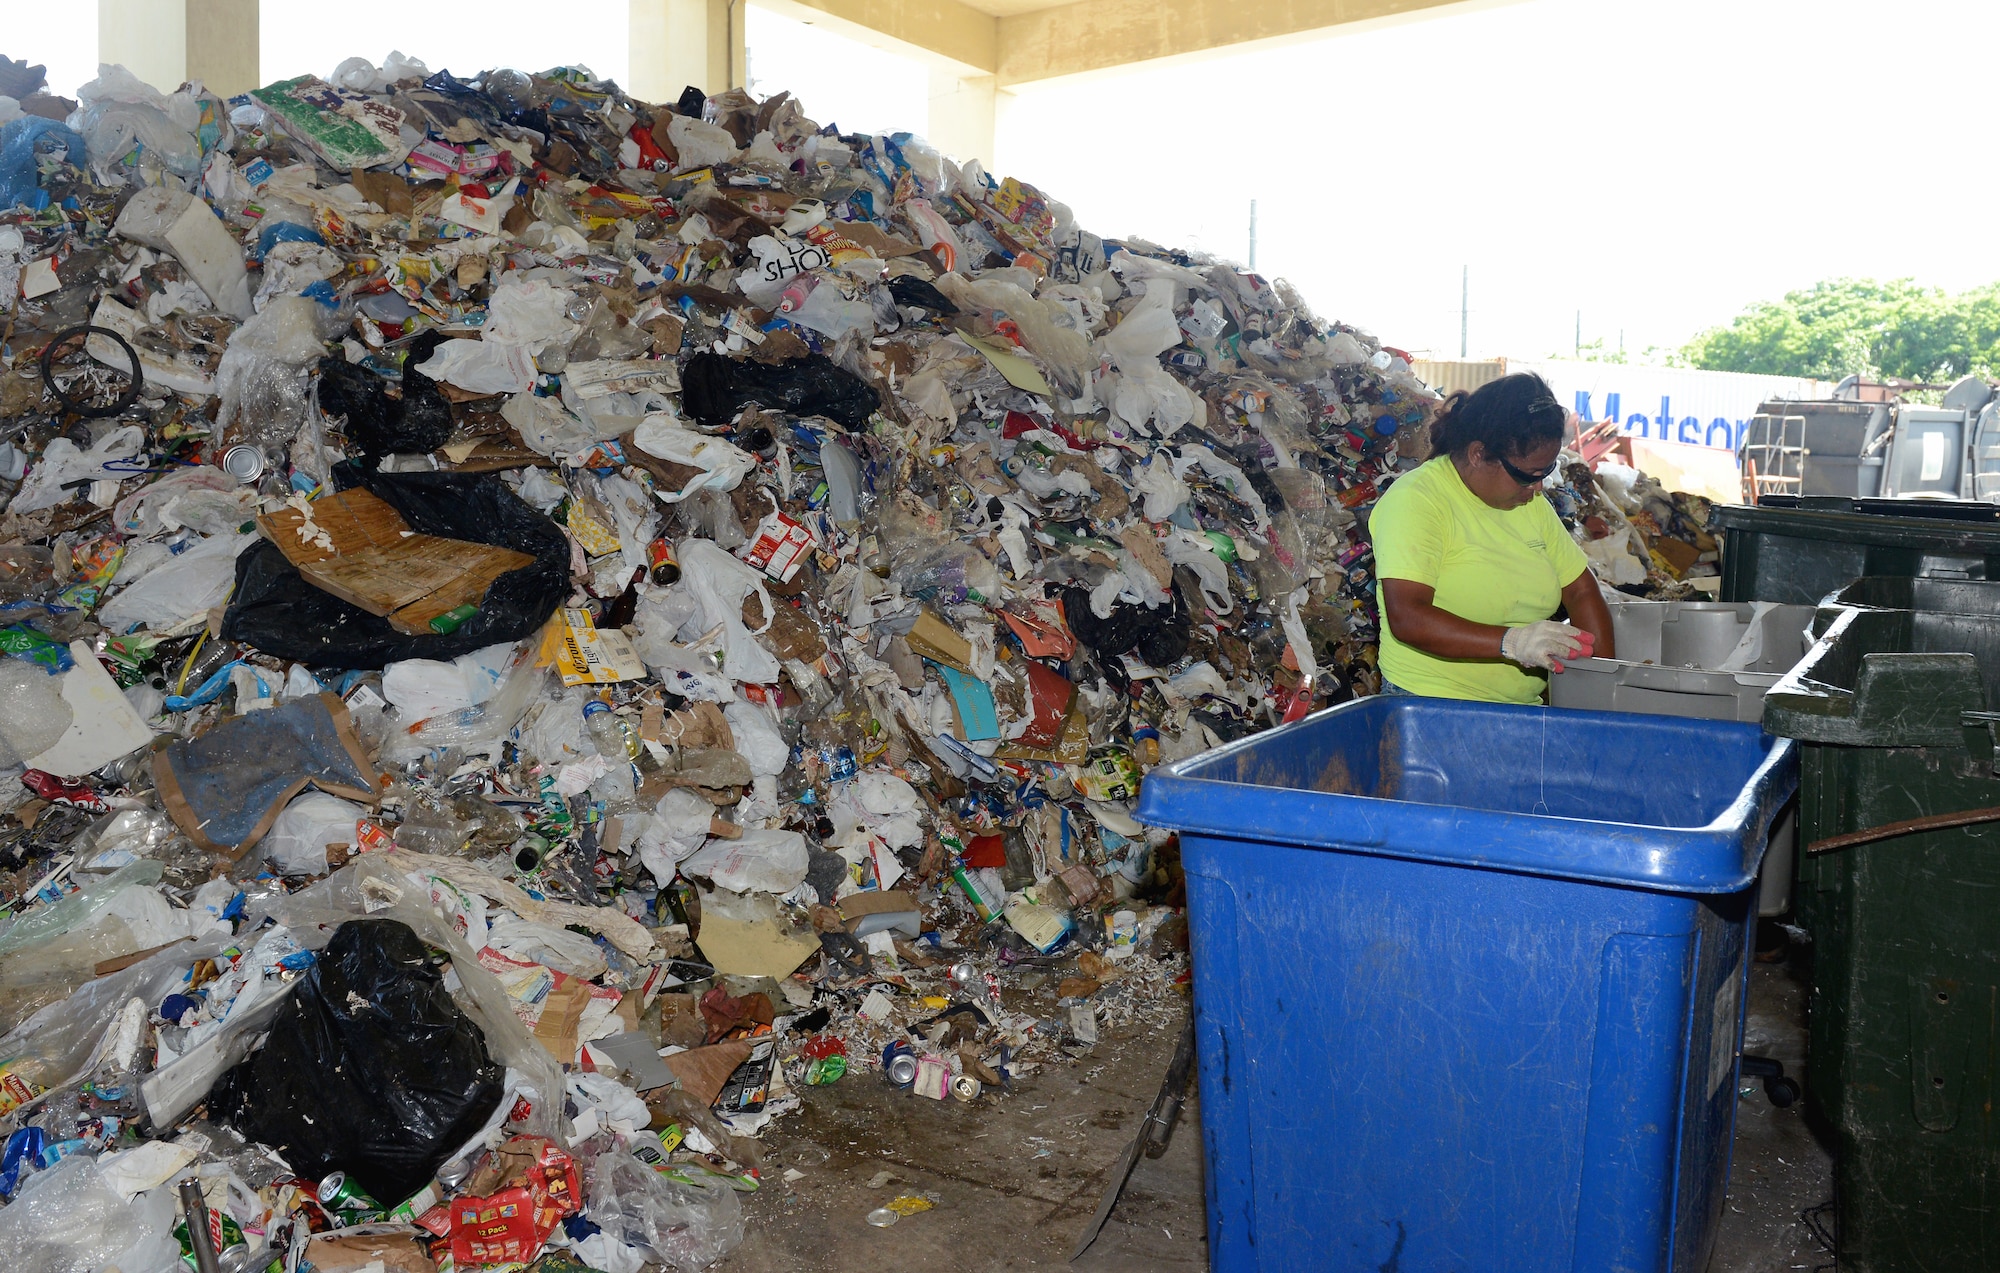 Jessica Dabinon, Arc Light Recycling Center refuse collector, separates recyclable material from a pile Aug. 28, 2015, at Andersen Air Force Base, Guam. The Arc Light Recycling Center’s goal is to divert as much material out of the waste stream as possible. (U.S. Air Force photo by Airman 1st Class Arielle Vasquez/Released)